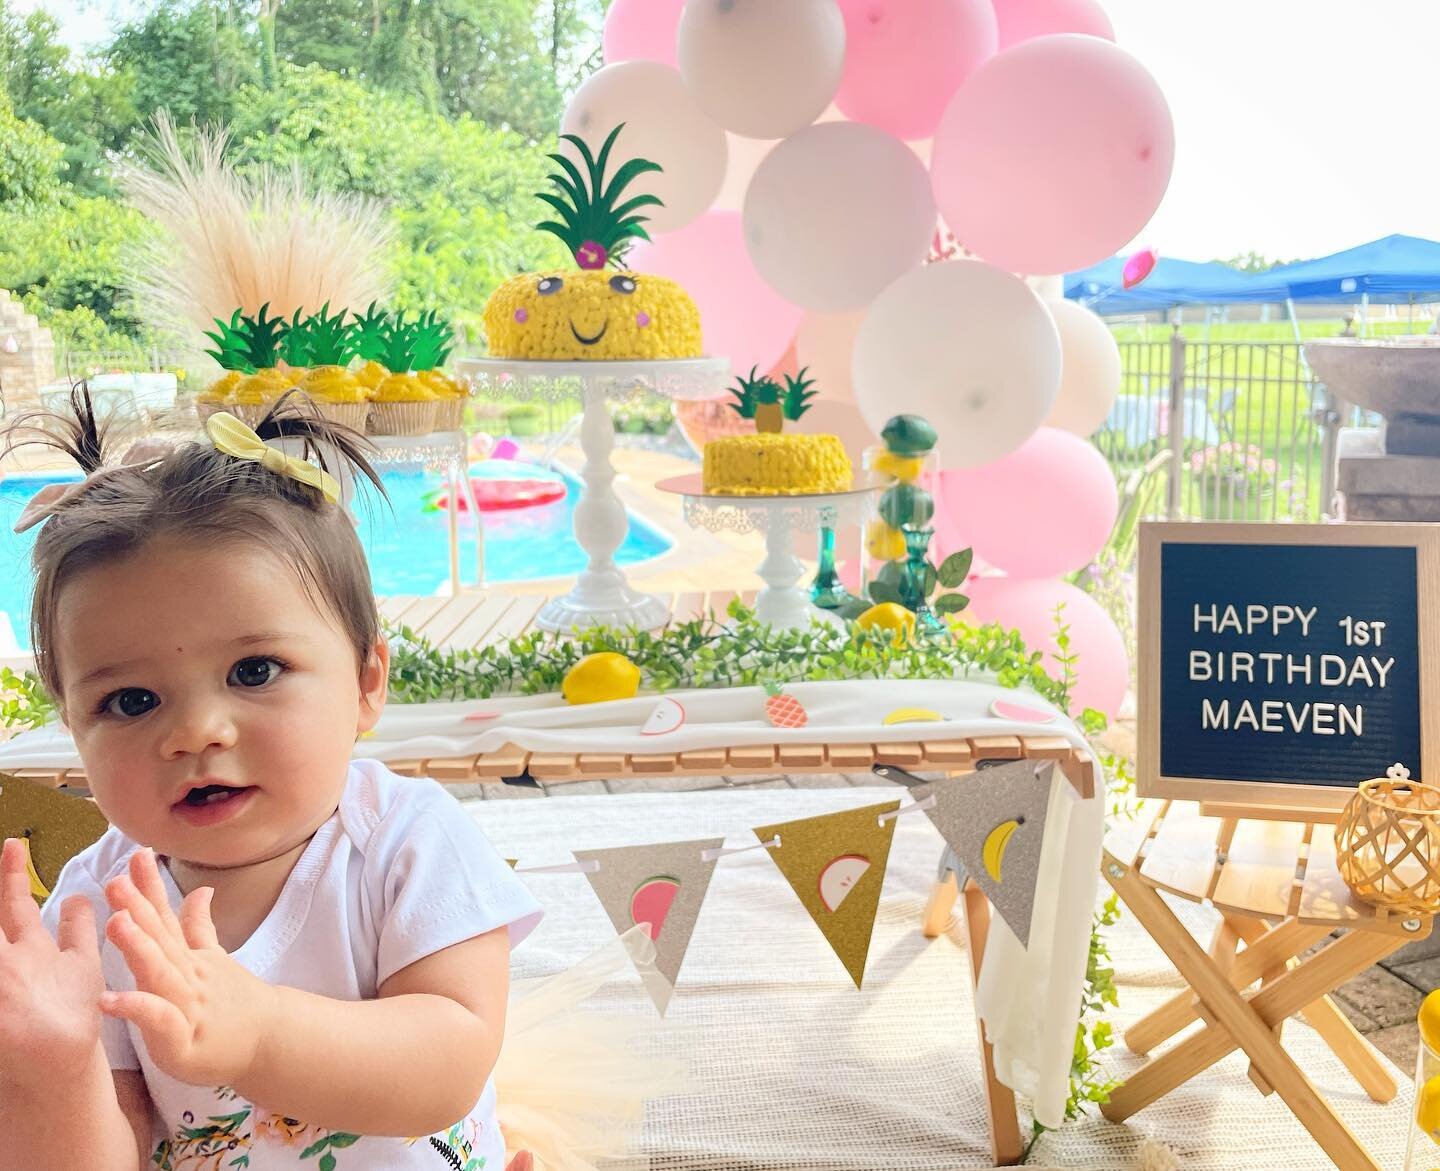 When you&rsquo;re cute and you know it clap your hands! Happy birthday to sweet baby Maeven who turned 1 this weekend! We hope you enjoyed your smash cake tablespread! 🎂

#babybirthdayparty #smashcake #smashcakephotoshoot #babylove #cutiepie #babies